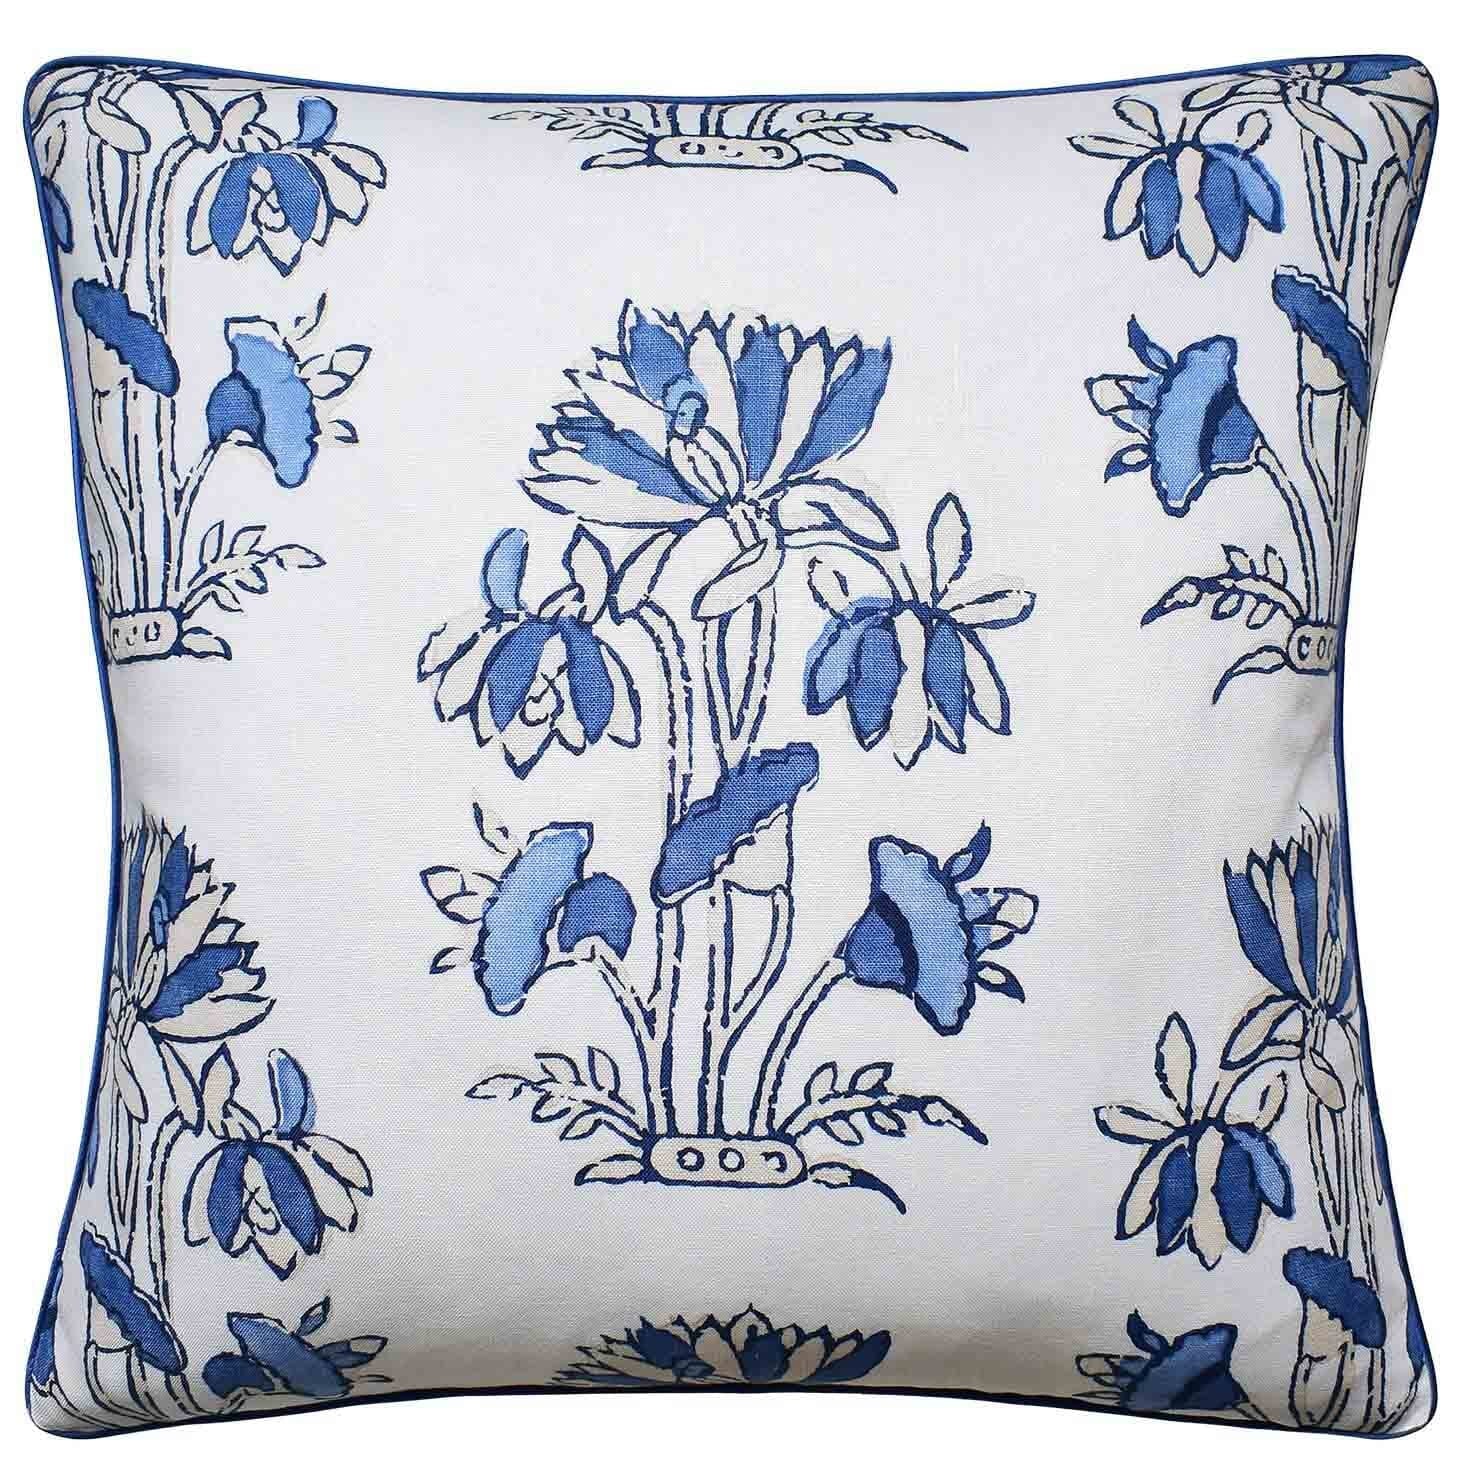 Lily Flower Blue and White Decorative Pillow - Throw Pillow by Ryan Studio at Fig Linens and Home